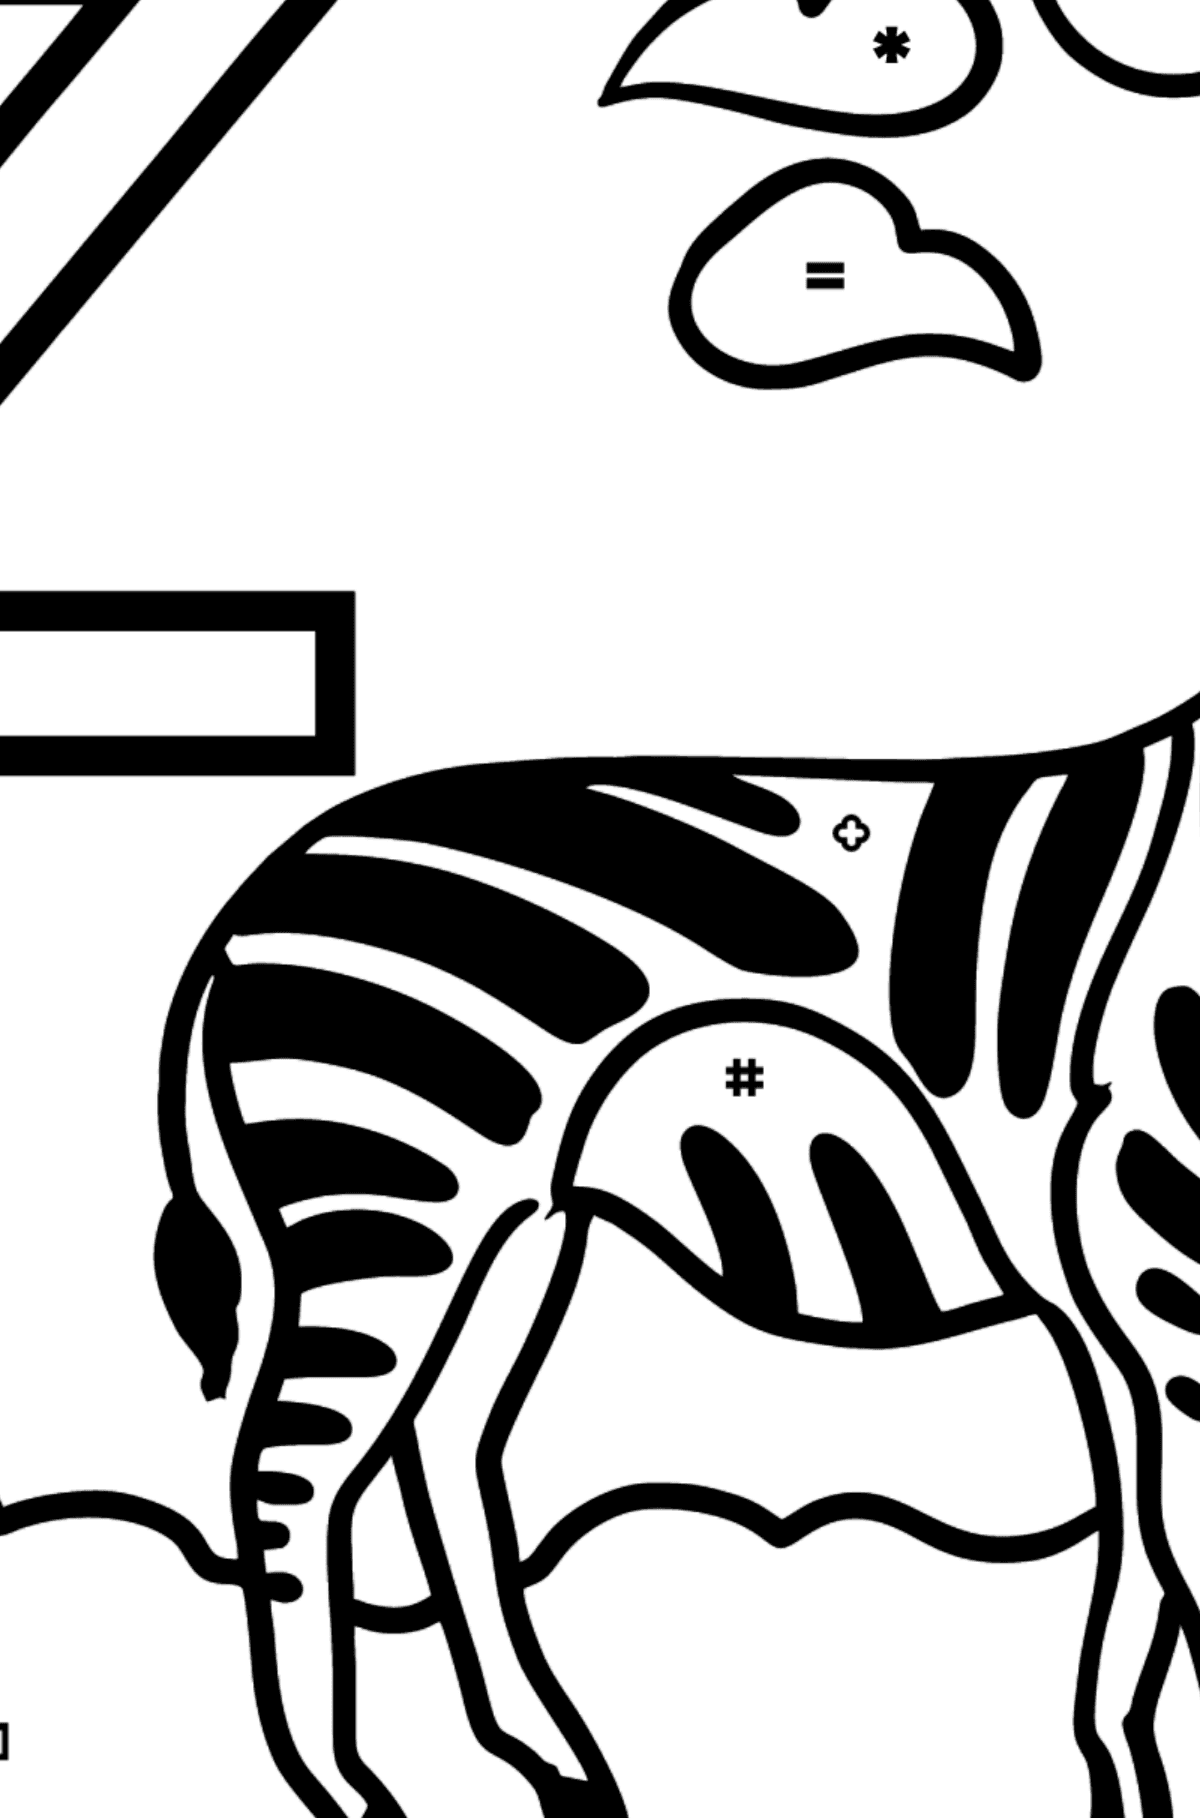 English Letter Z coloring pages - ZEBRA - Coloring by Symbols and Geometric Shapes for Kids